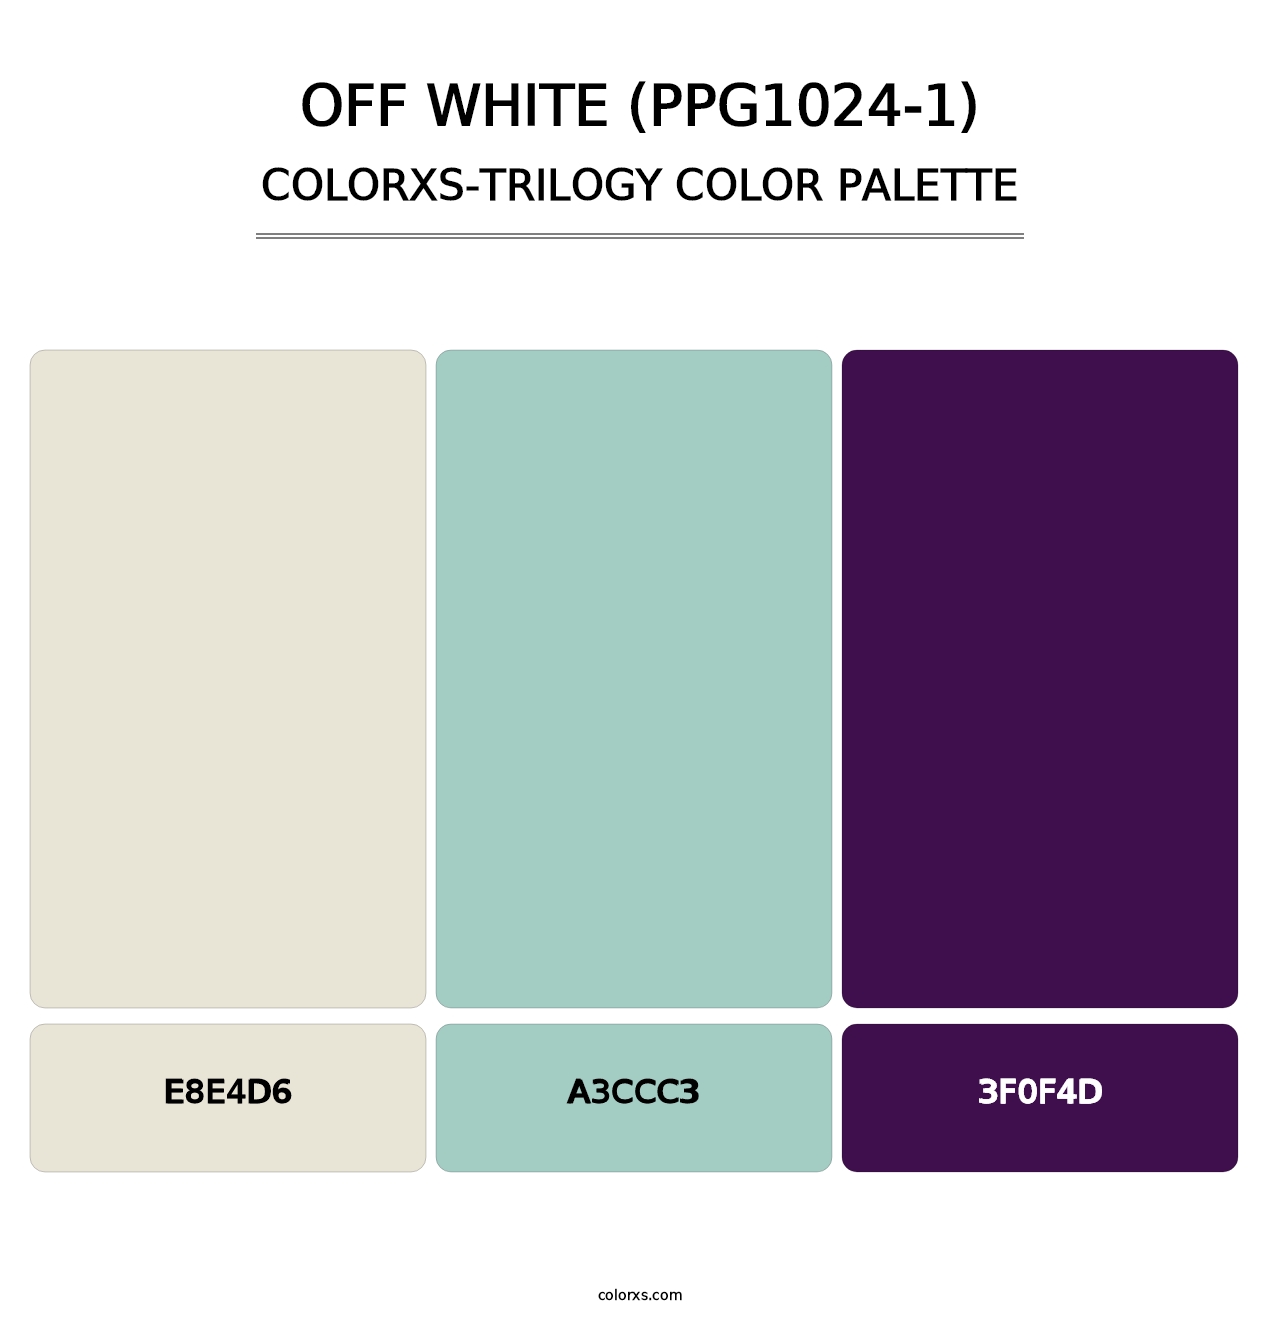 Off White (PPG1024-1) - Colorxs Trilogy Palette